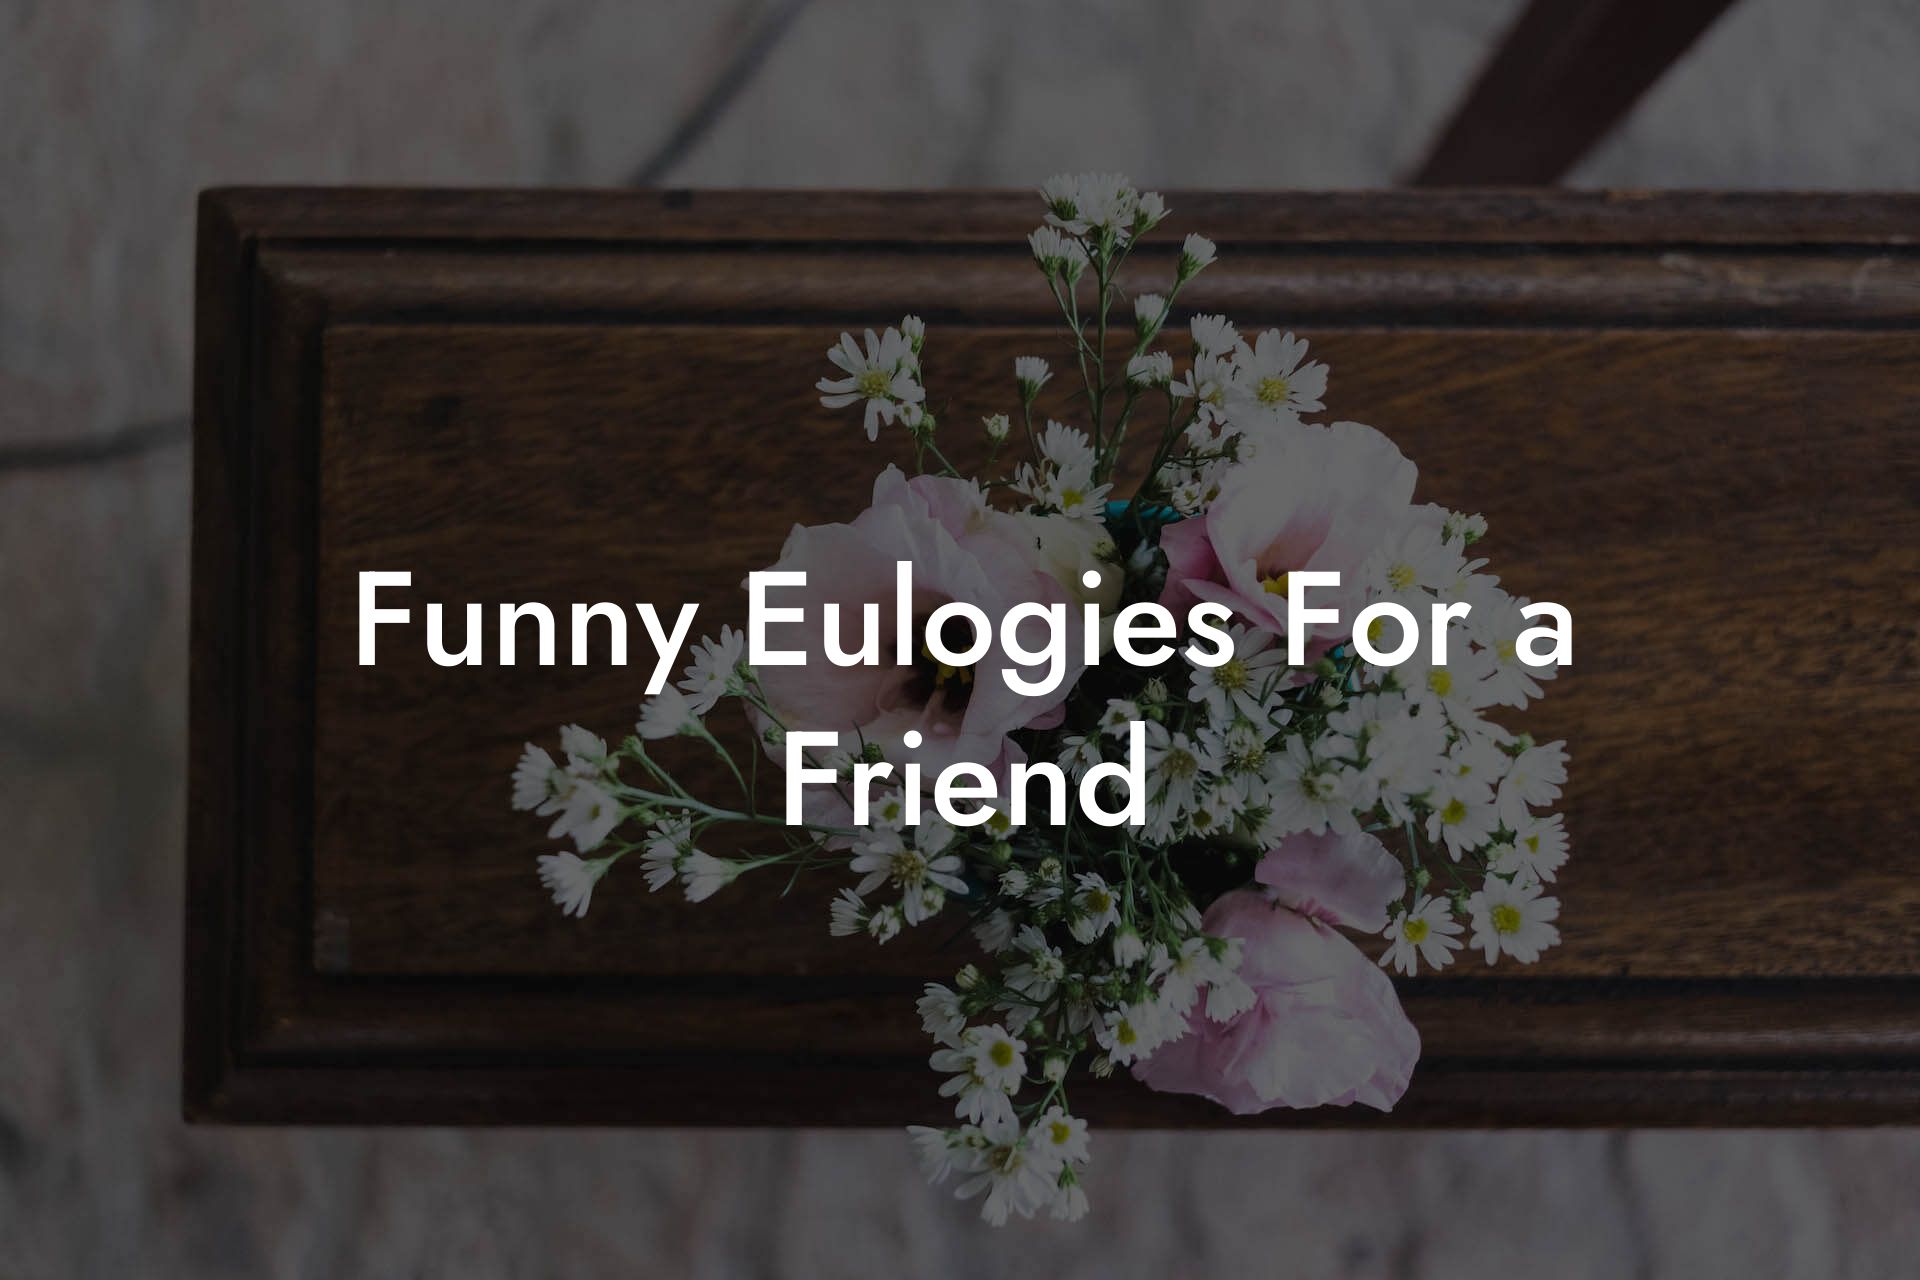 Funny Eulogies For a Friend